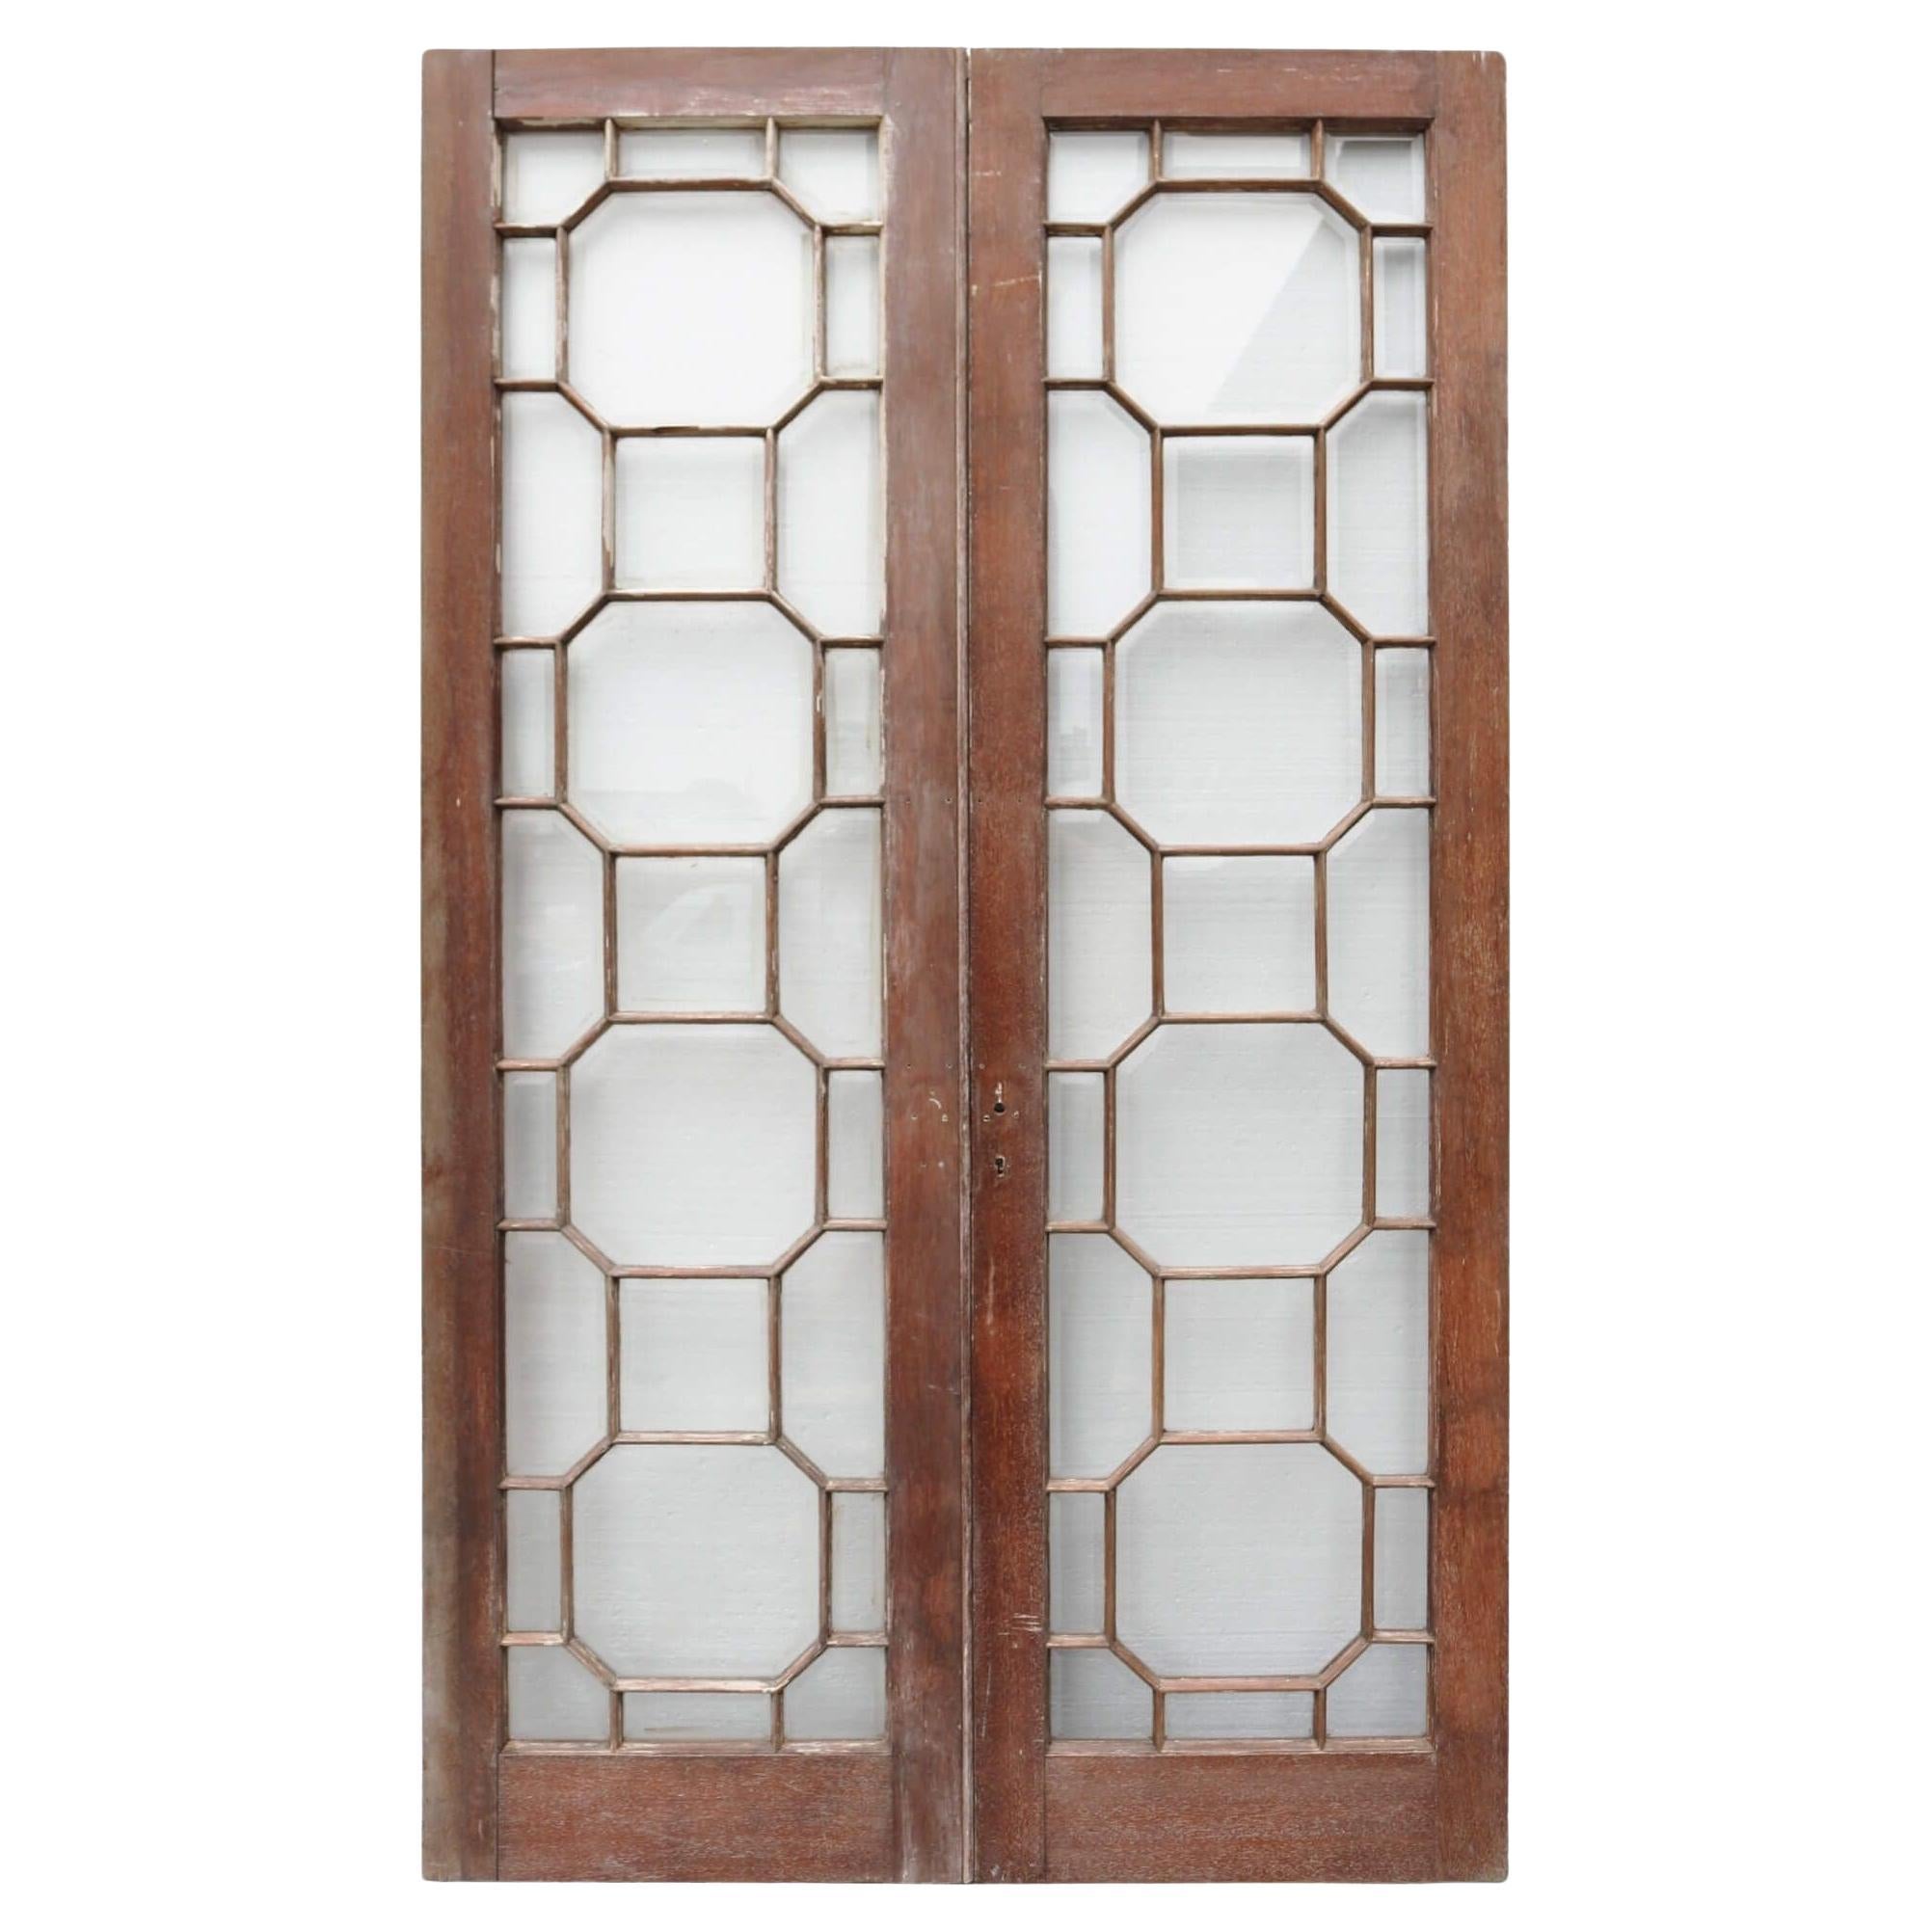 Georgian Style Internal Double Doors with Astral Glazing For Sale